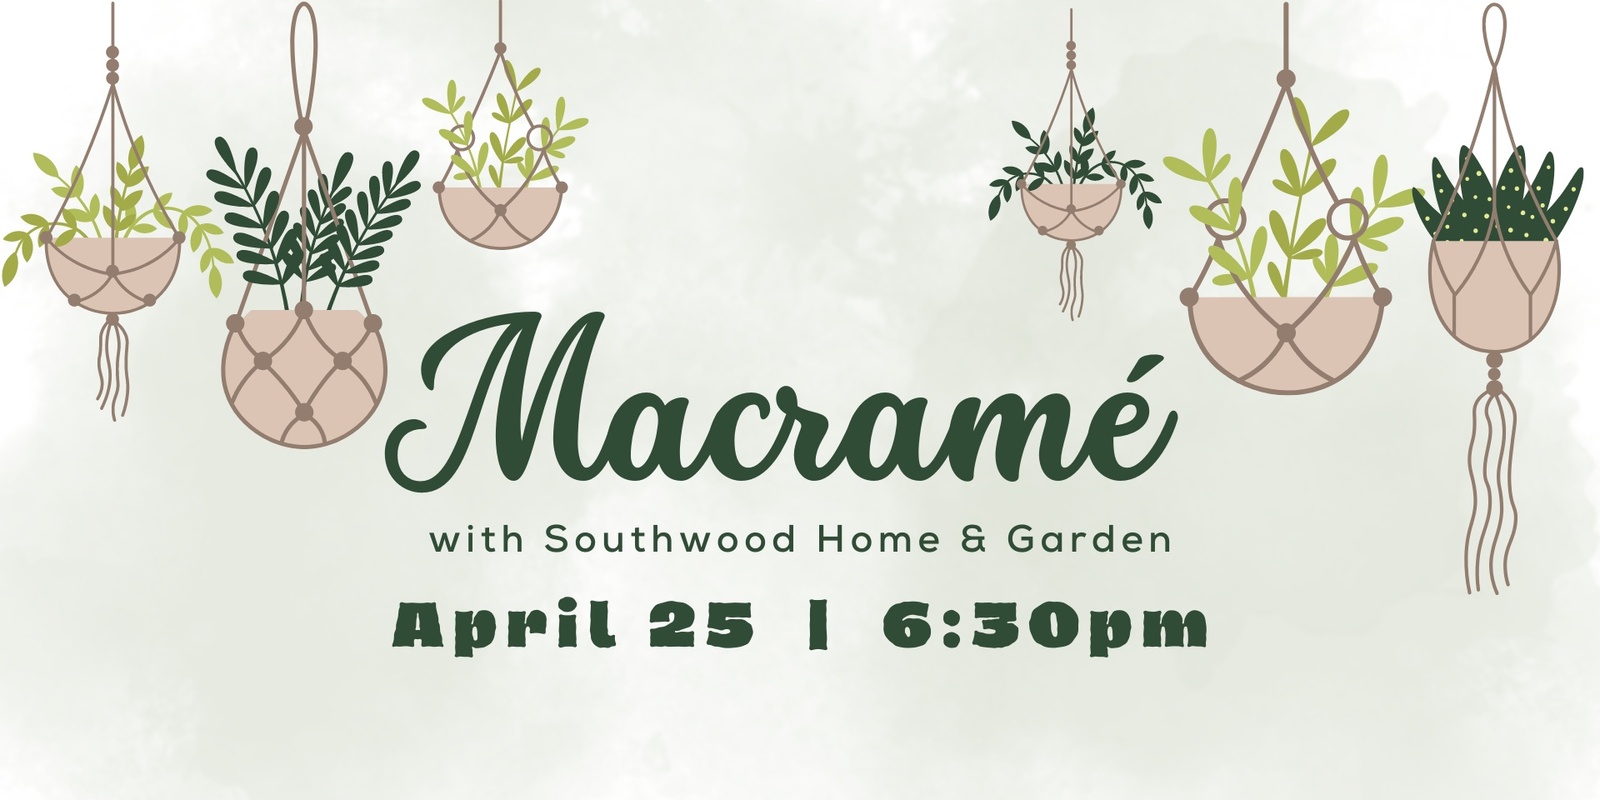 Banner image for Macramé with Southwood Home & Garden